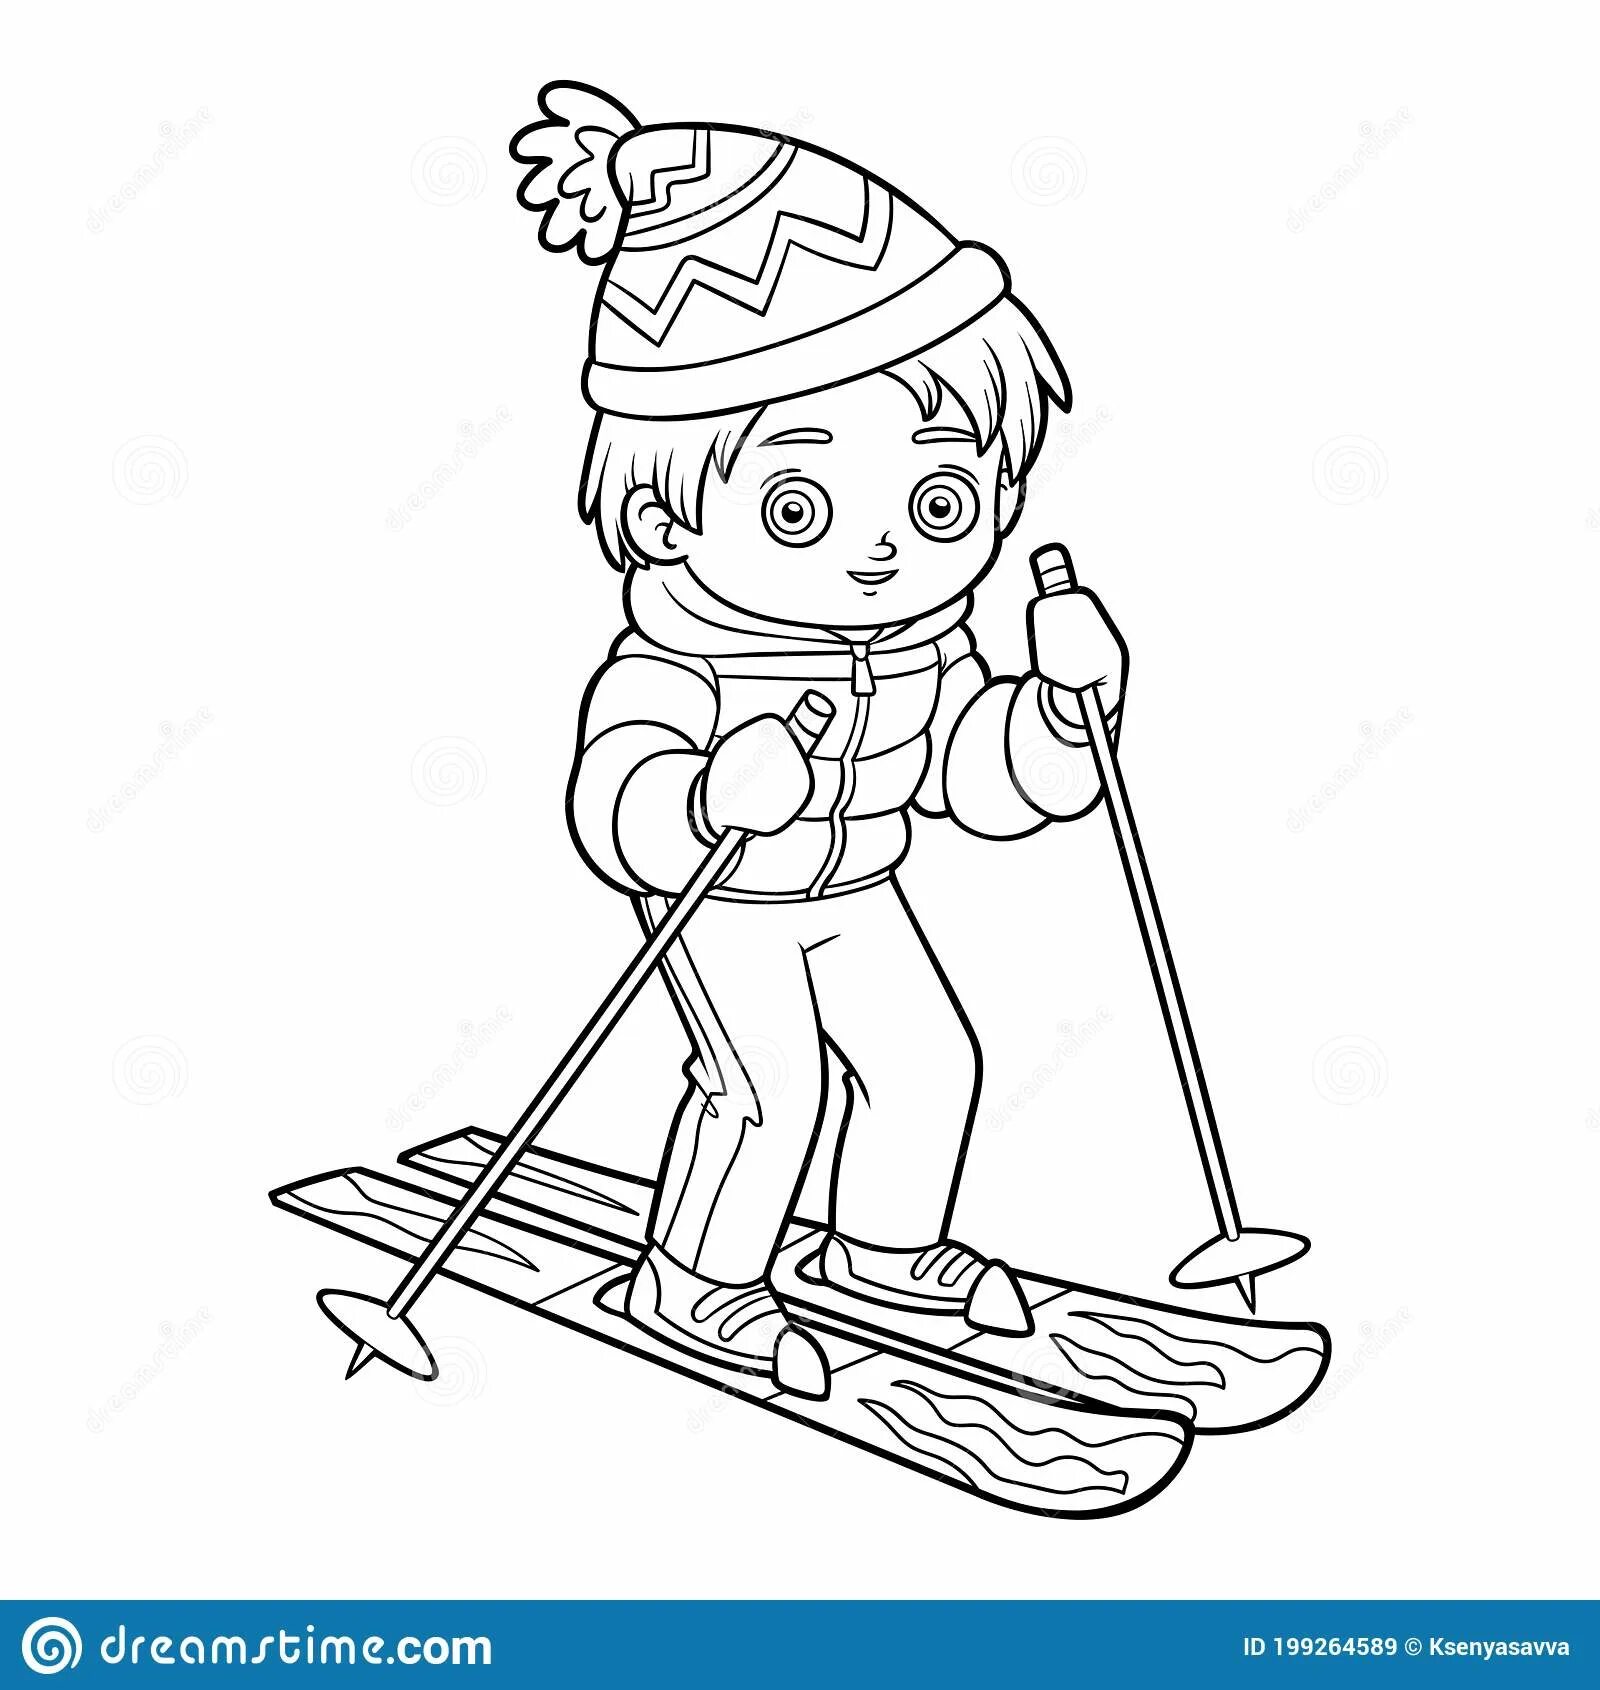 Boy skiing for kids #4